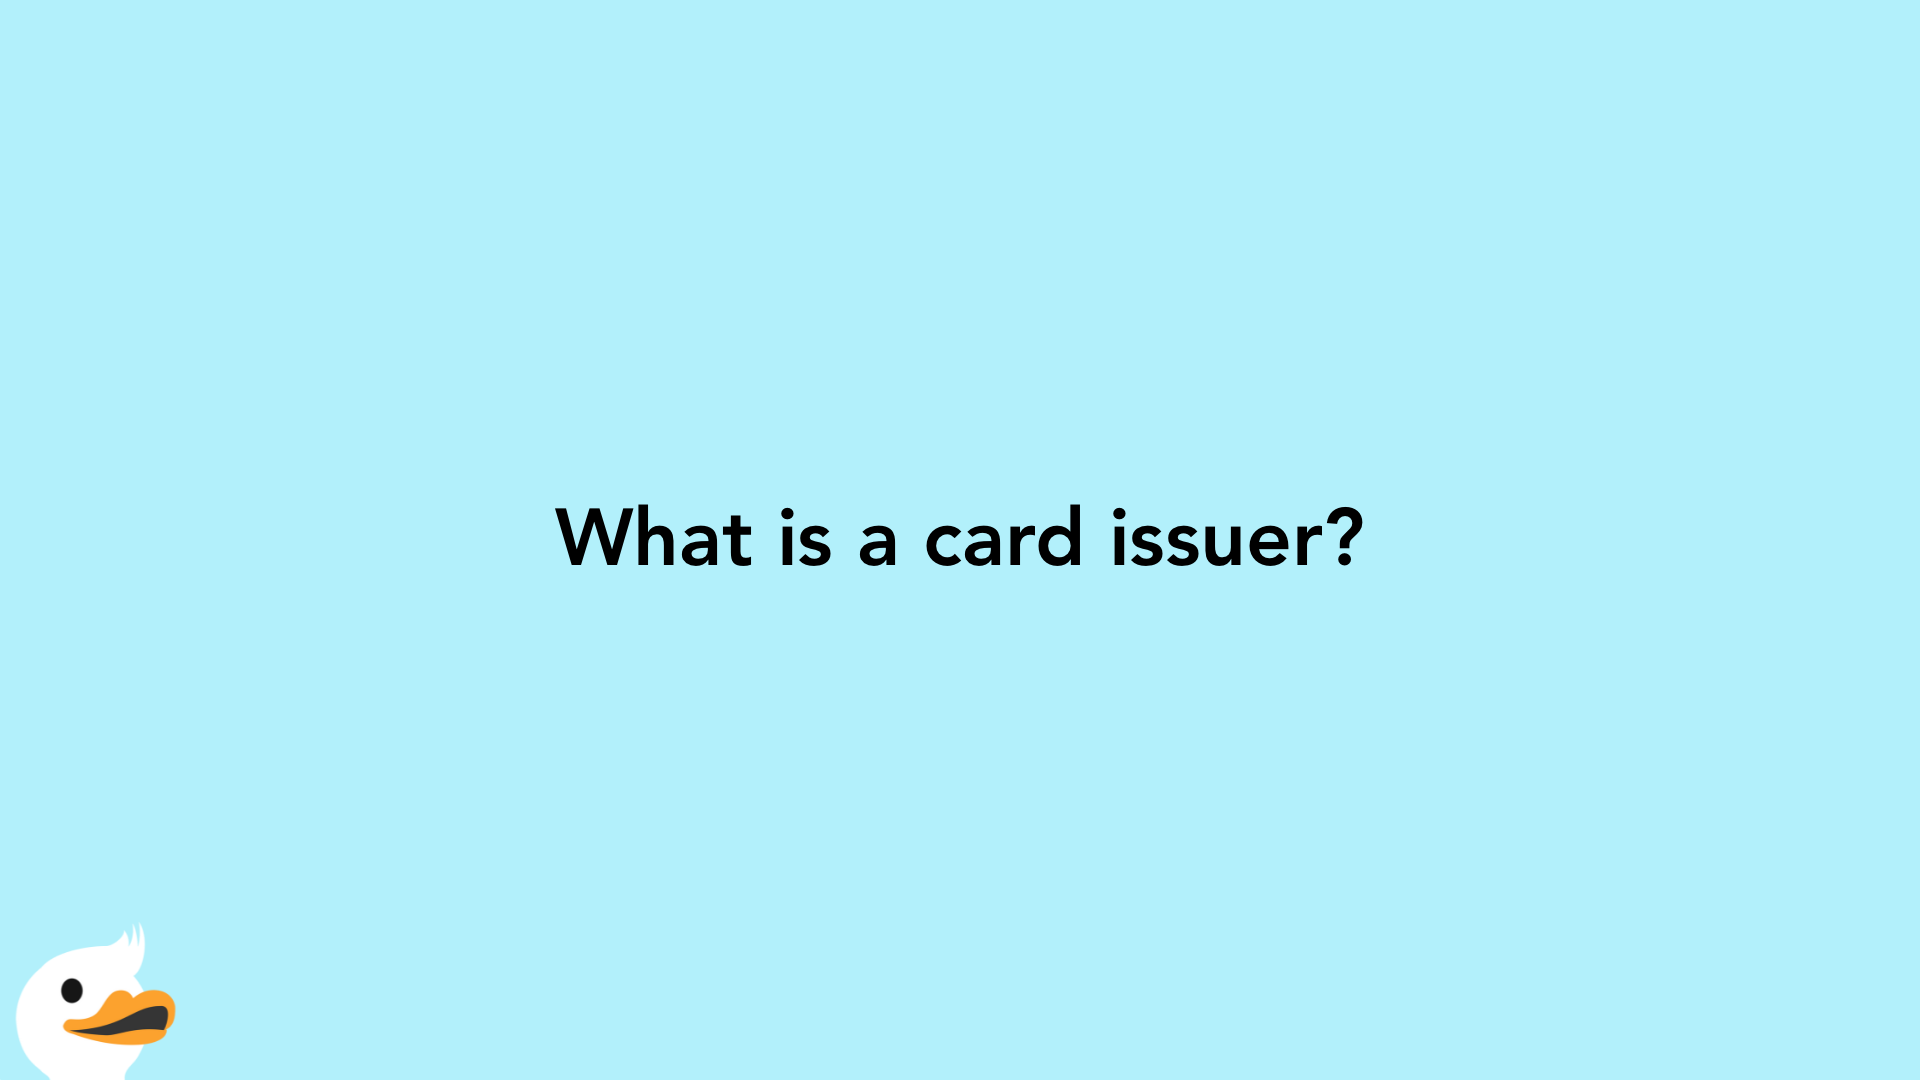 What is a card issuer?